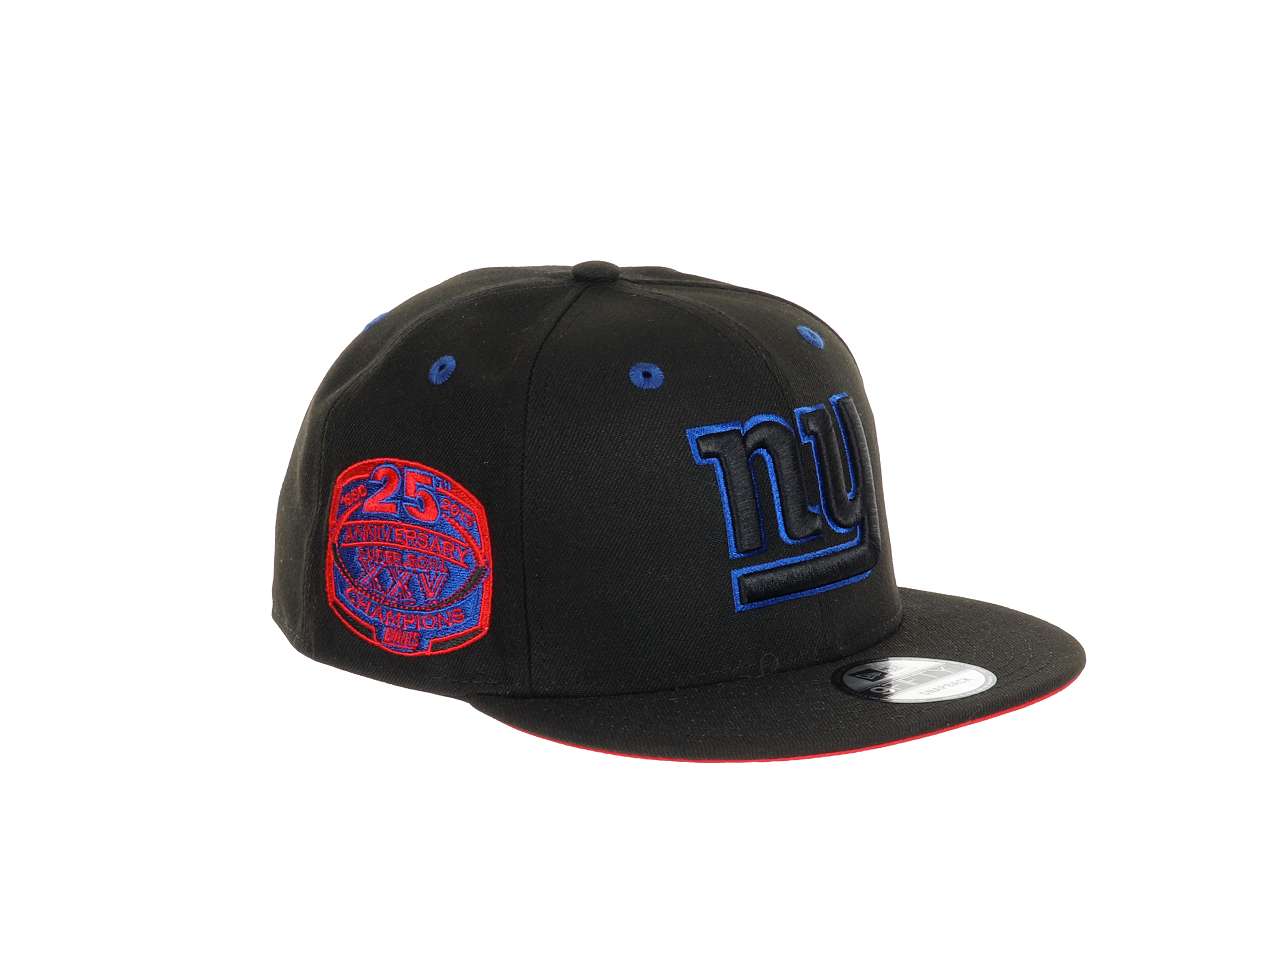 New York Giants NFL Team Colour 25th Anniversary Champions Sidepatch Black 9Fifty Snapback Cap New Era